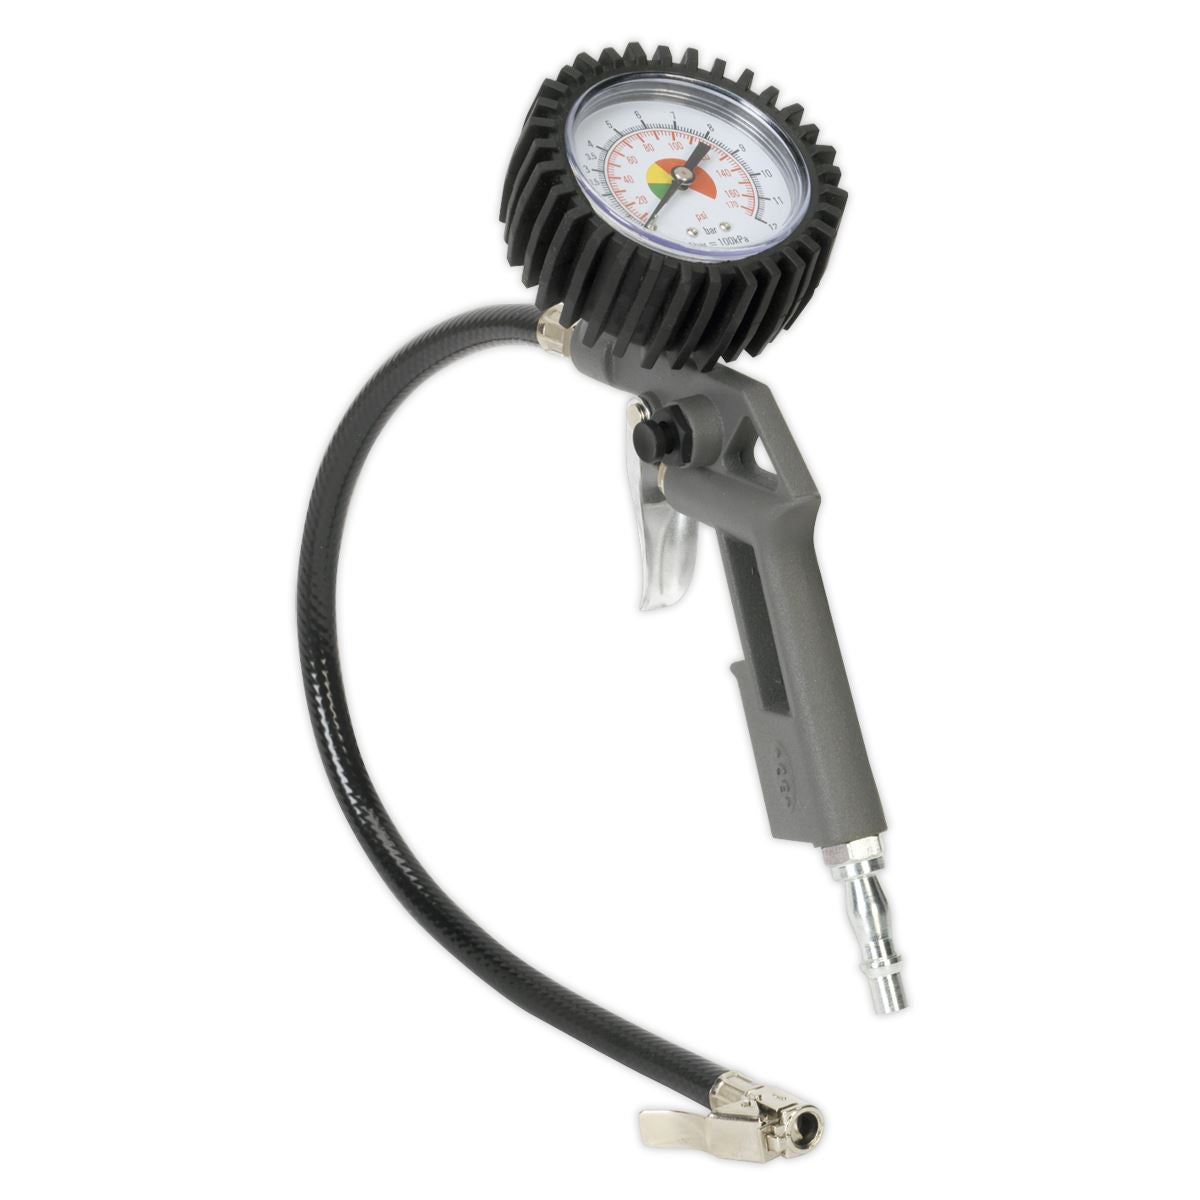 Sealey Air Tyre Inflator With Dial Gauge 1/4" BSP 0-175 PSI Quick Couplers